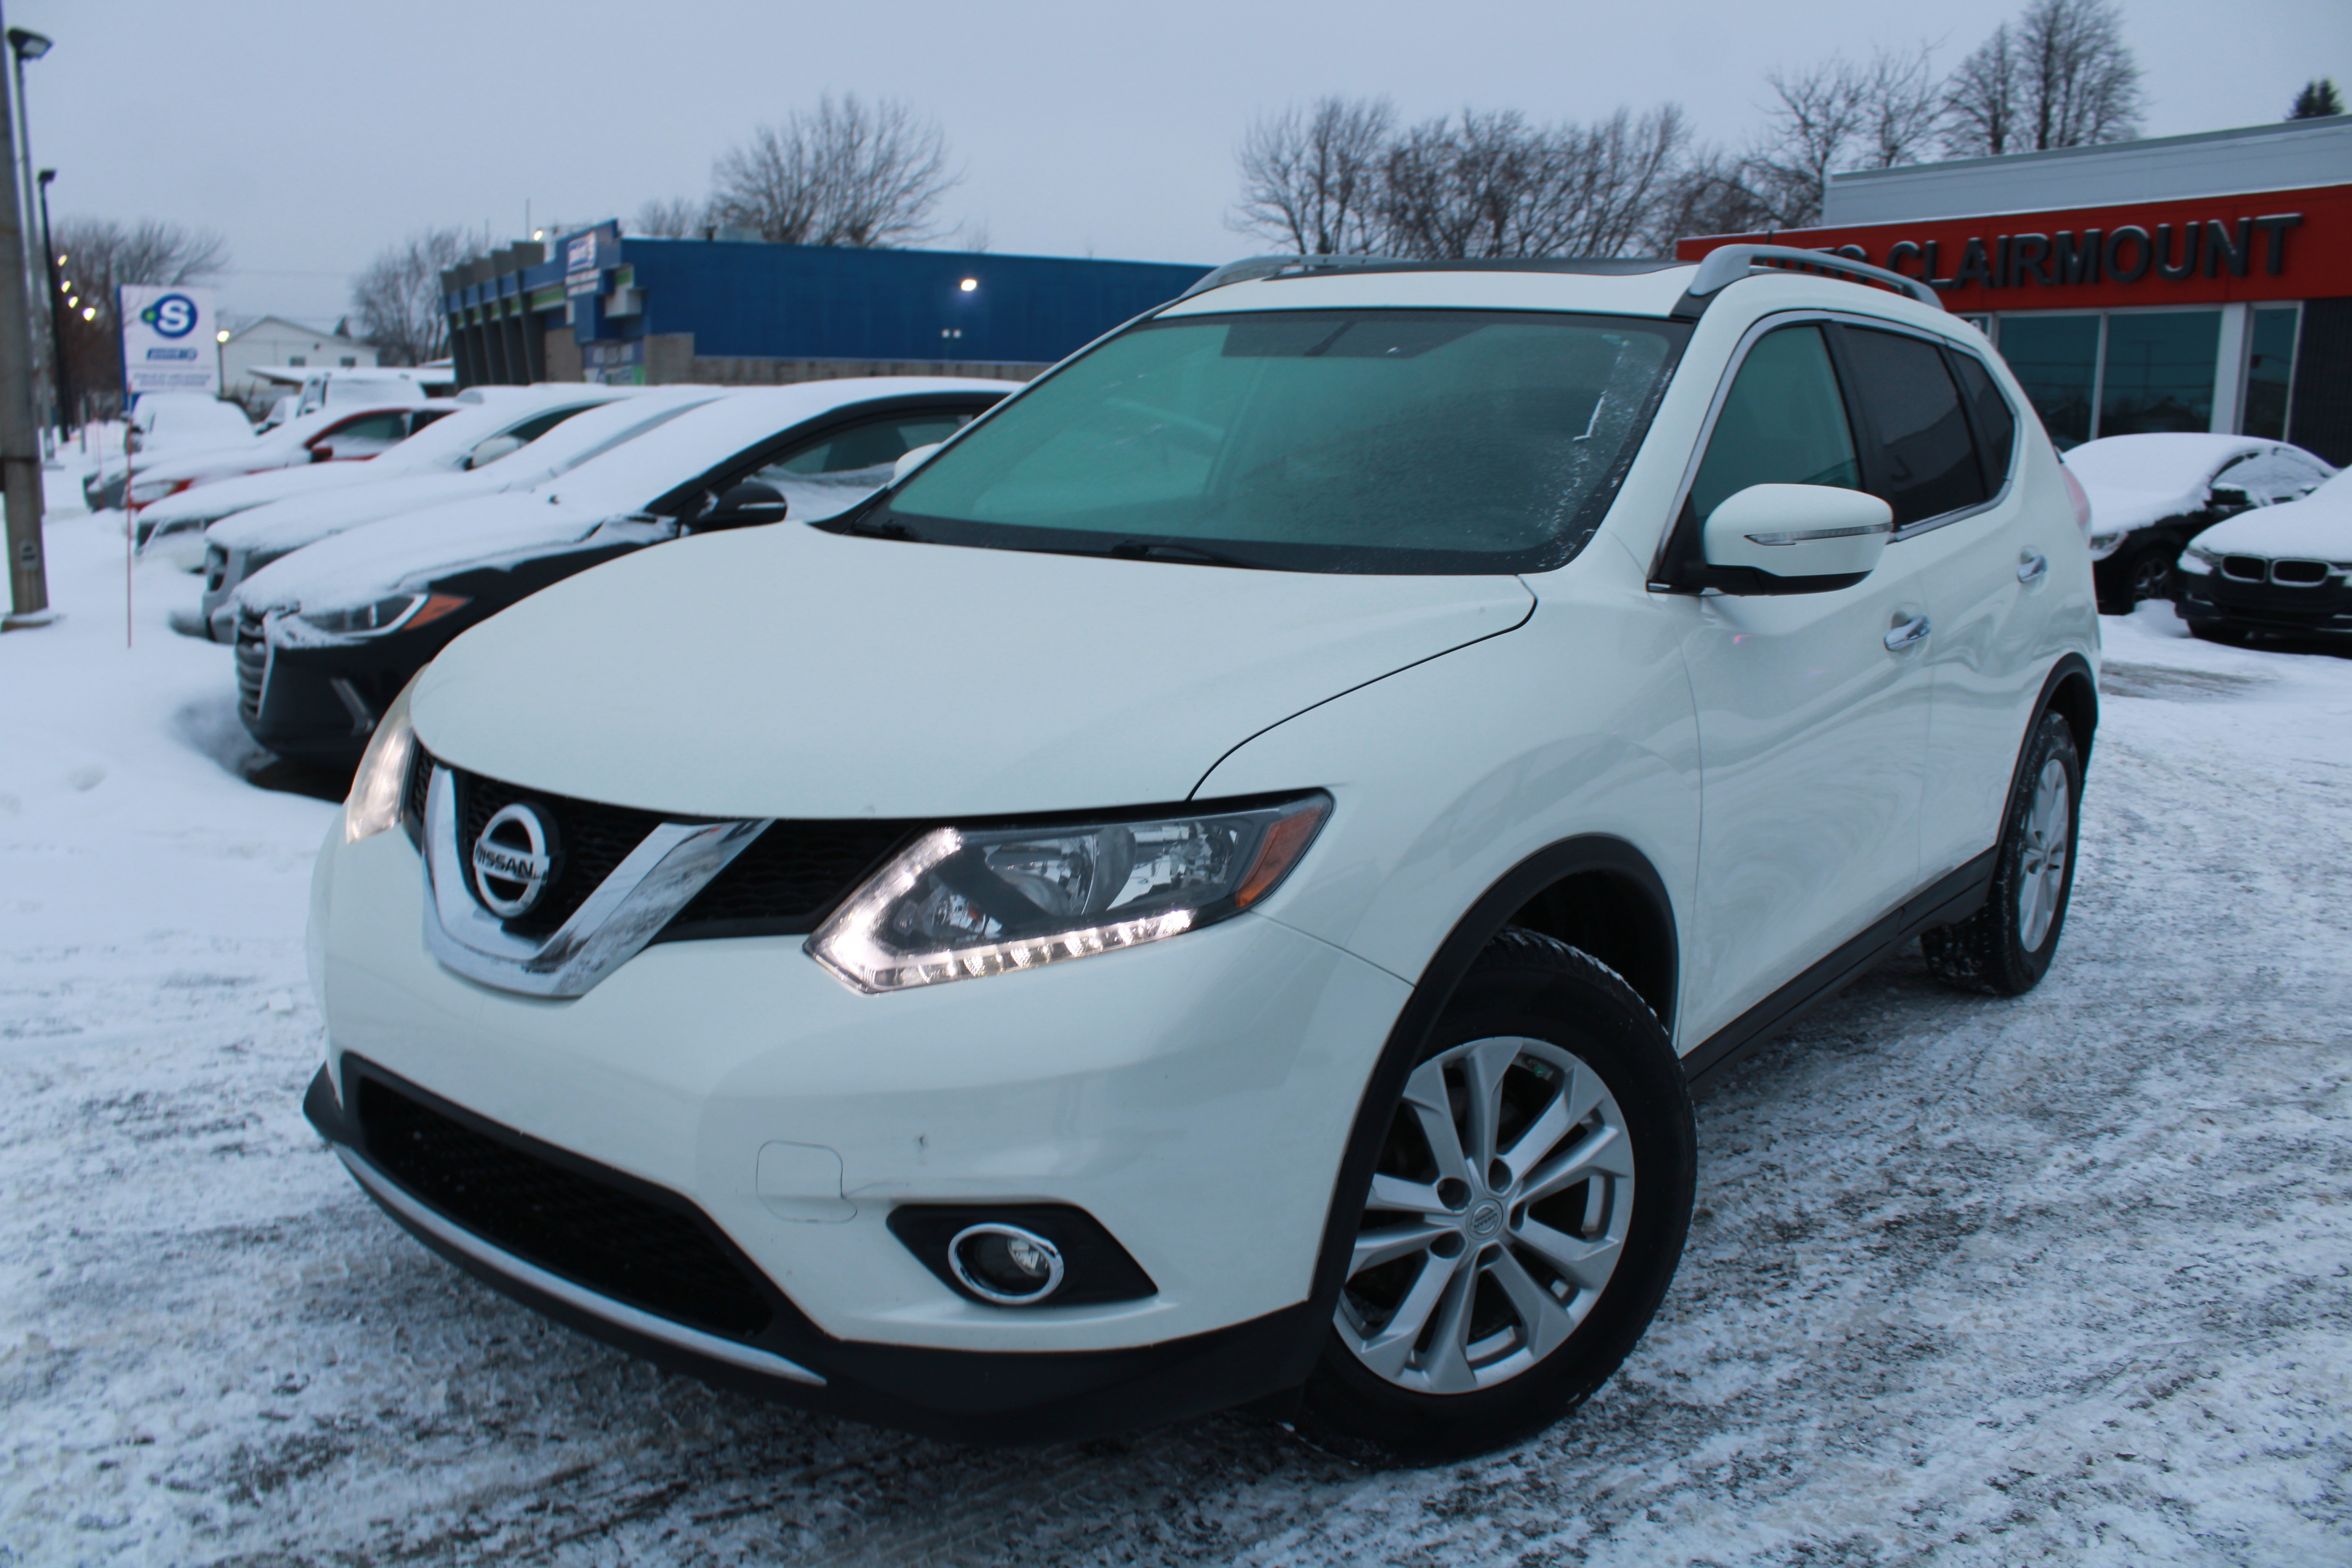 2015 Nissan Rogue FWD 4dr SV, BLUTOOTH, CAMERA +++